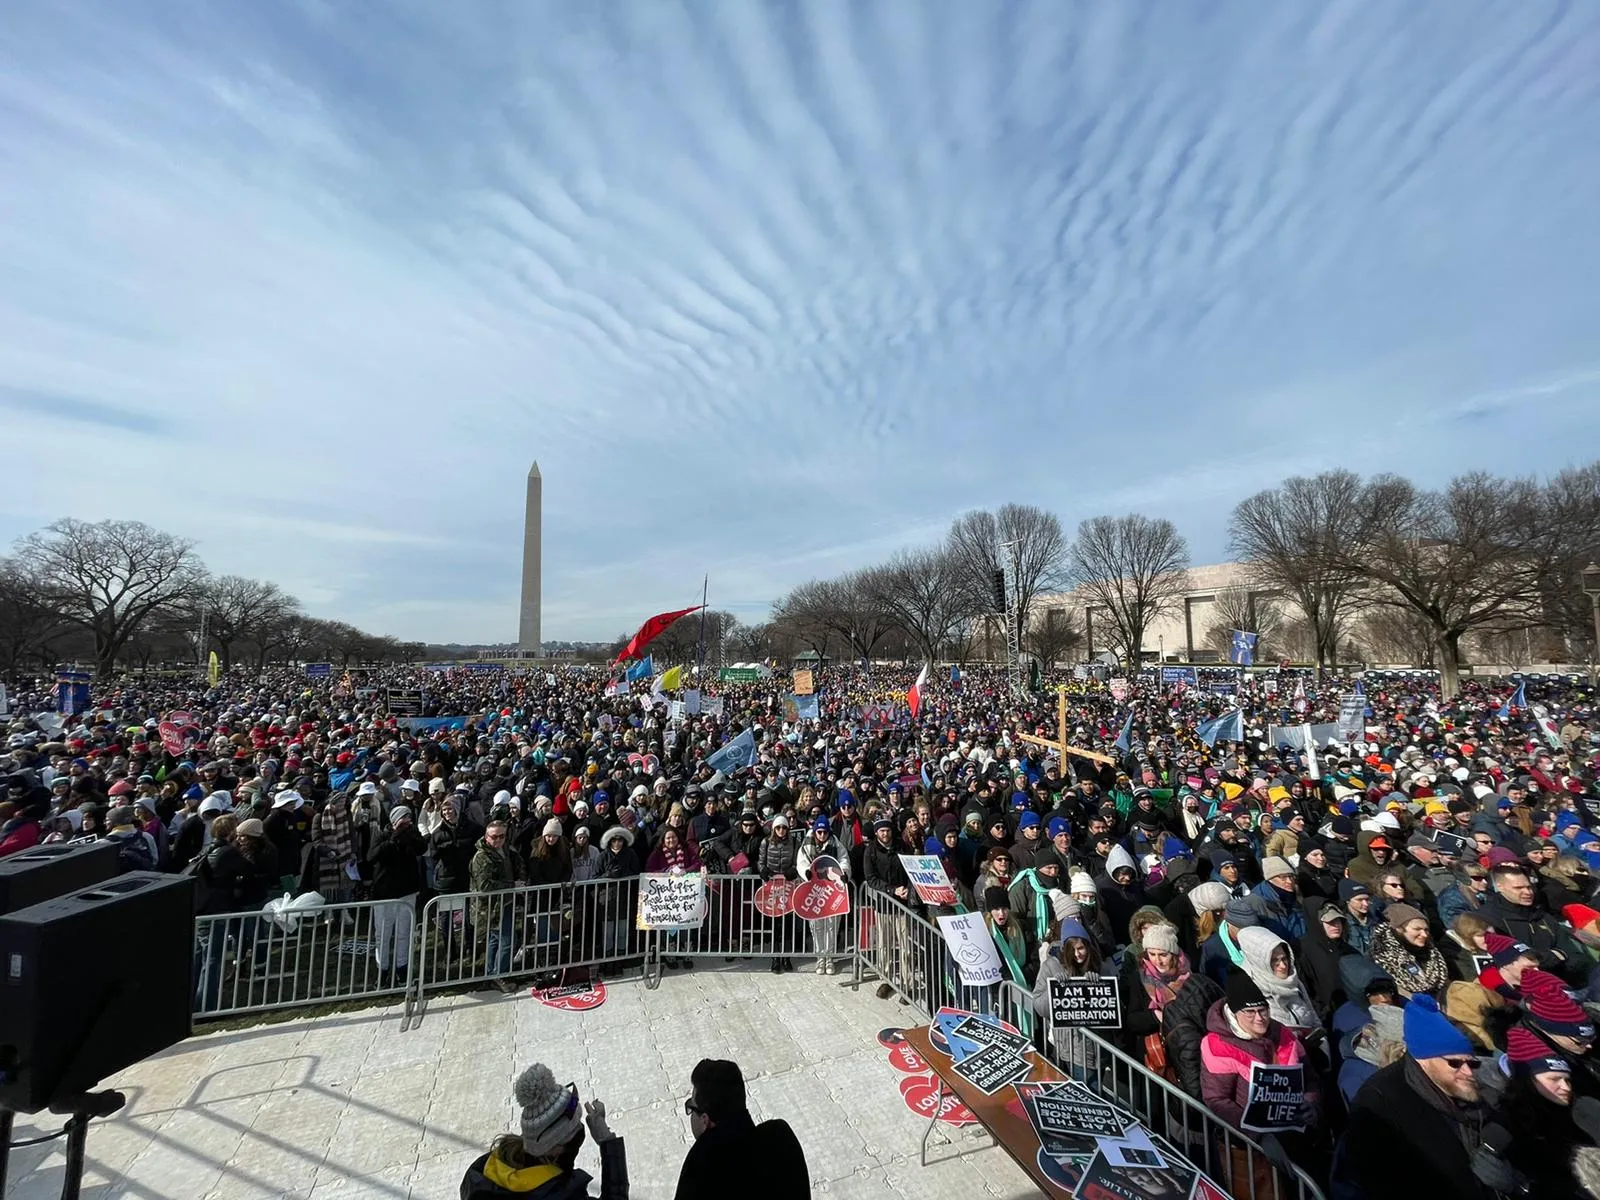 Tens of thousands gathered for a pre-march rally and concert at the National Mall for the 2022 March for Life in Washington, D.C.?w=200&h=150